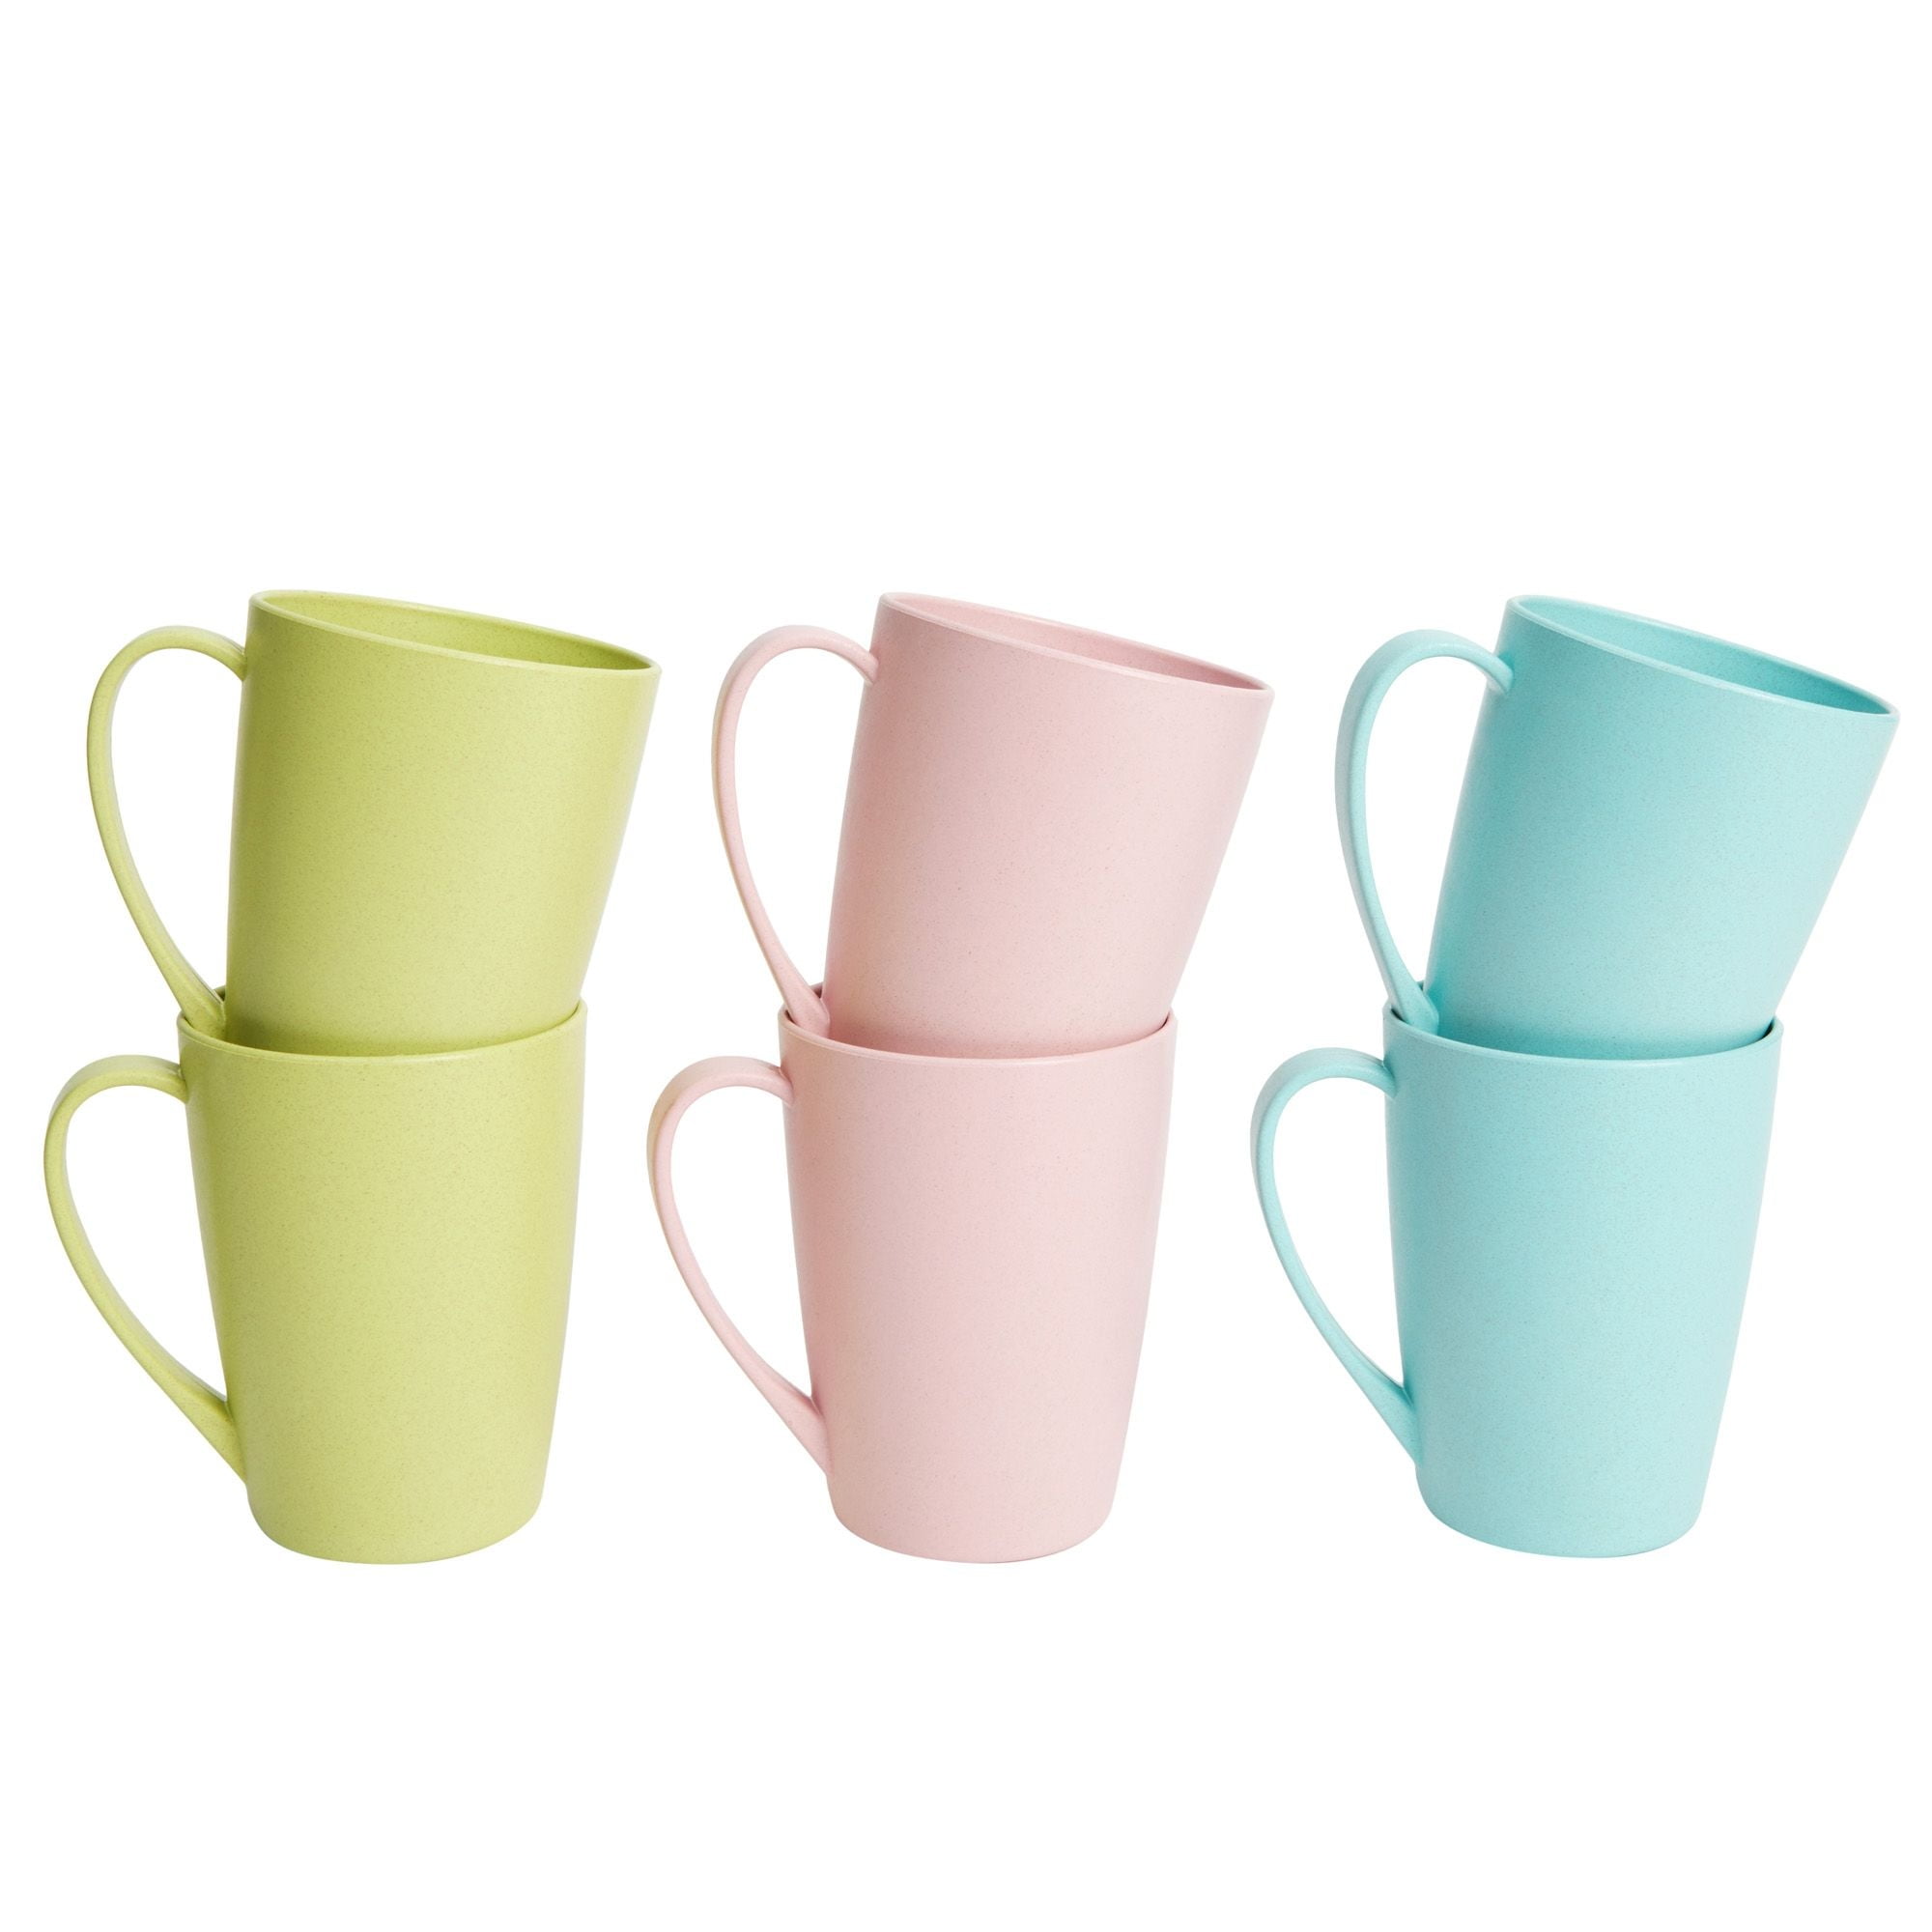 Wheat Straw Tea Cups Set Stackable Unbreakable Coffee Mugs 13.8 Oz Set of 6